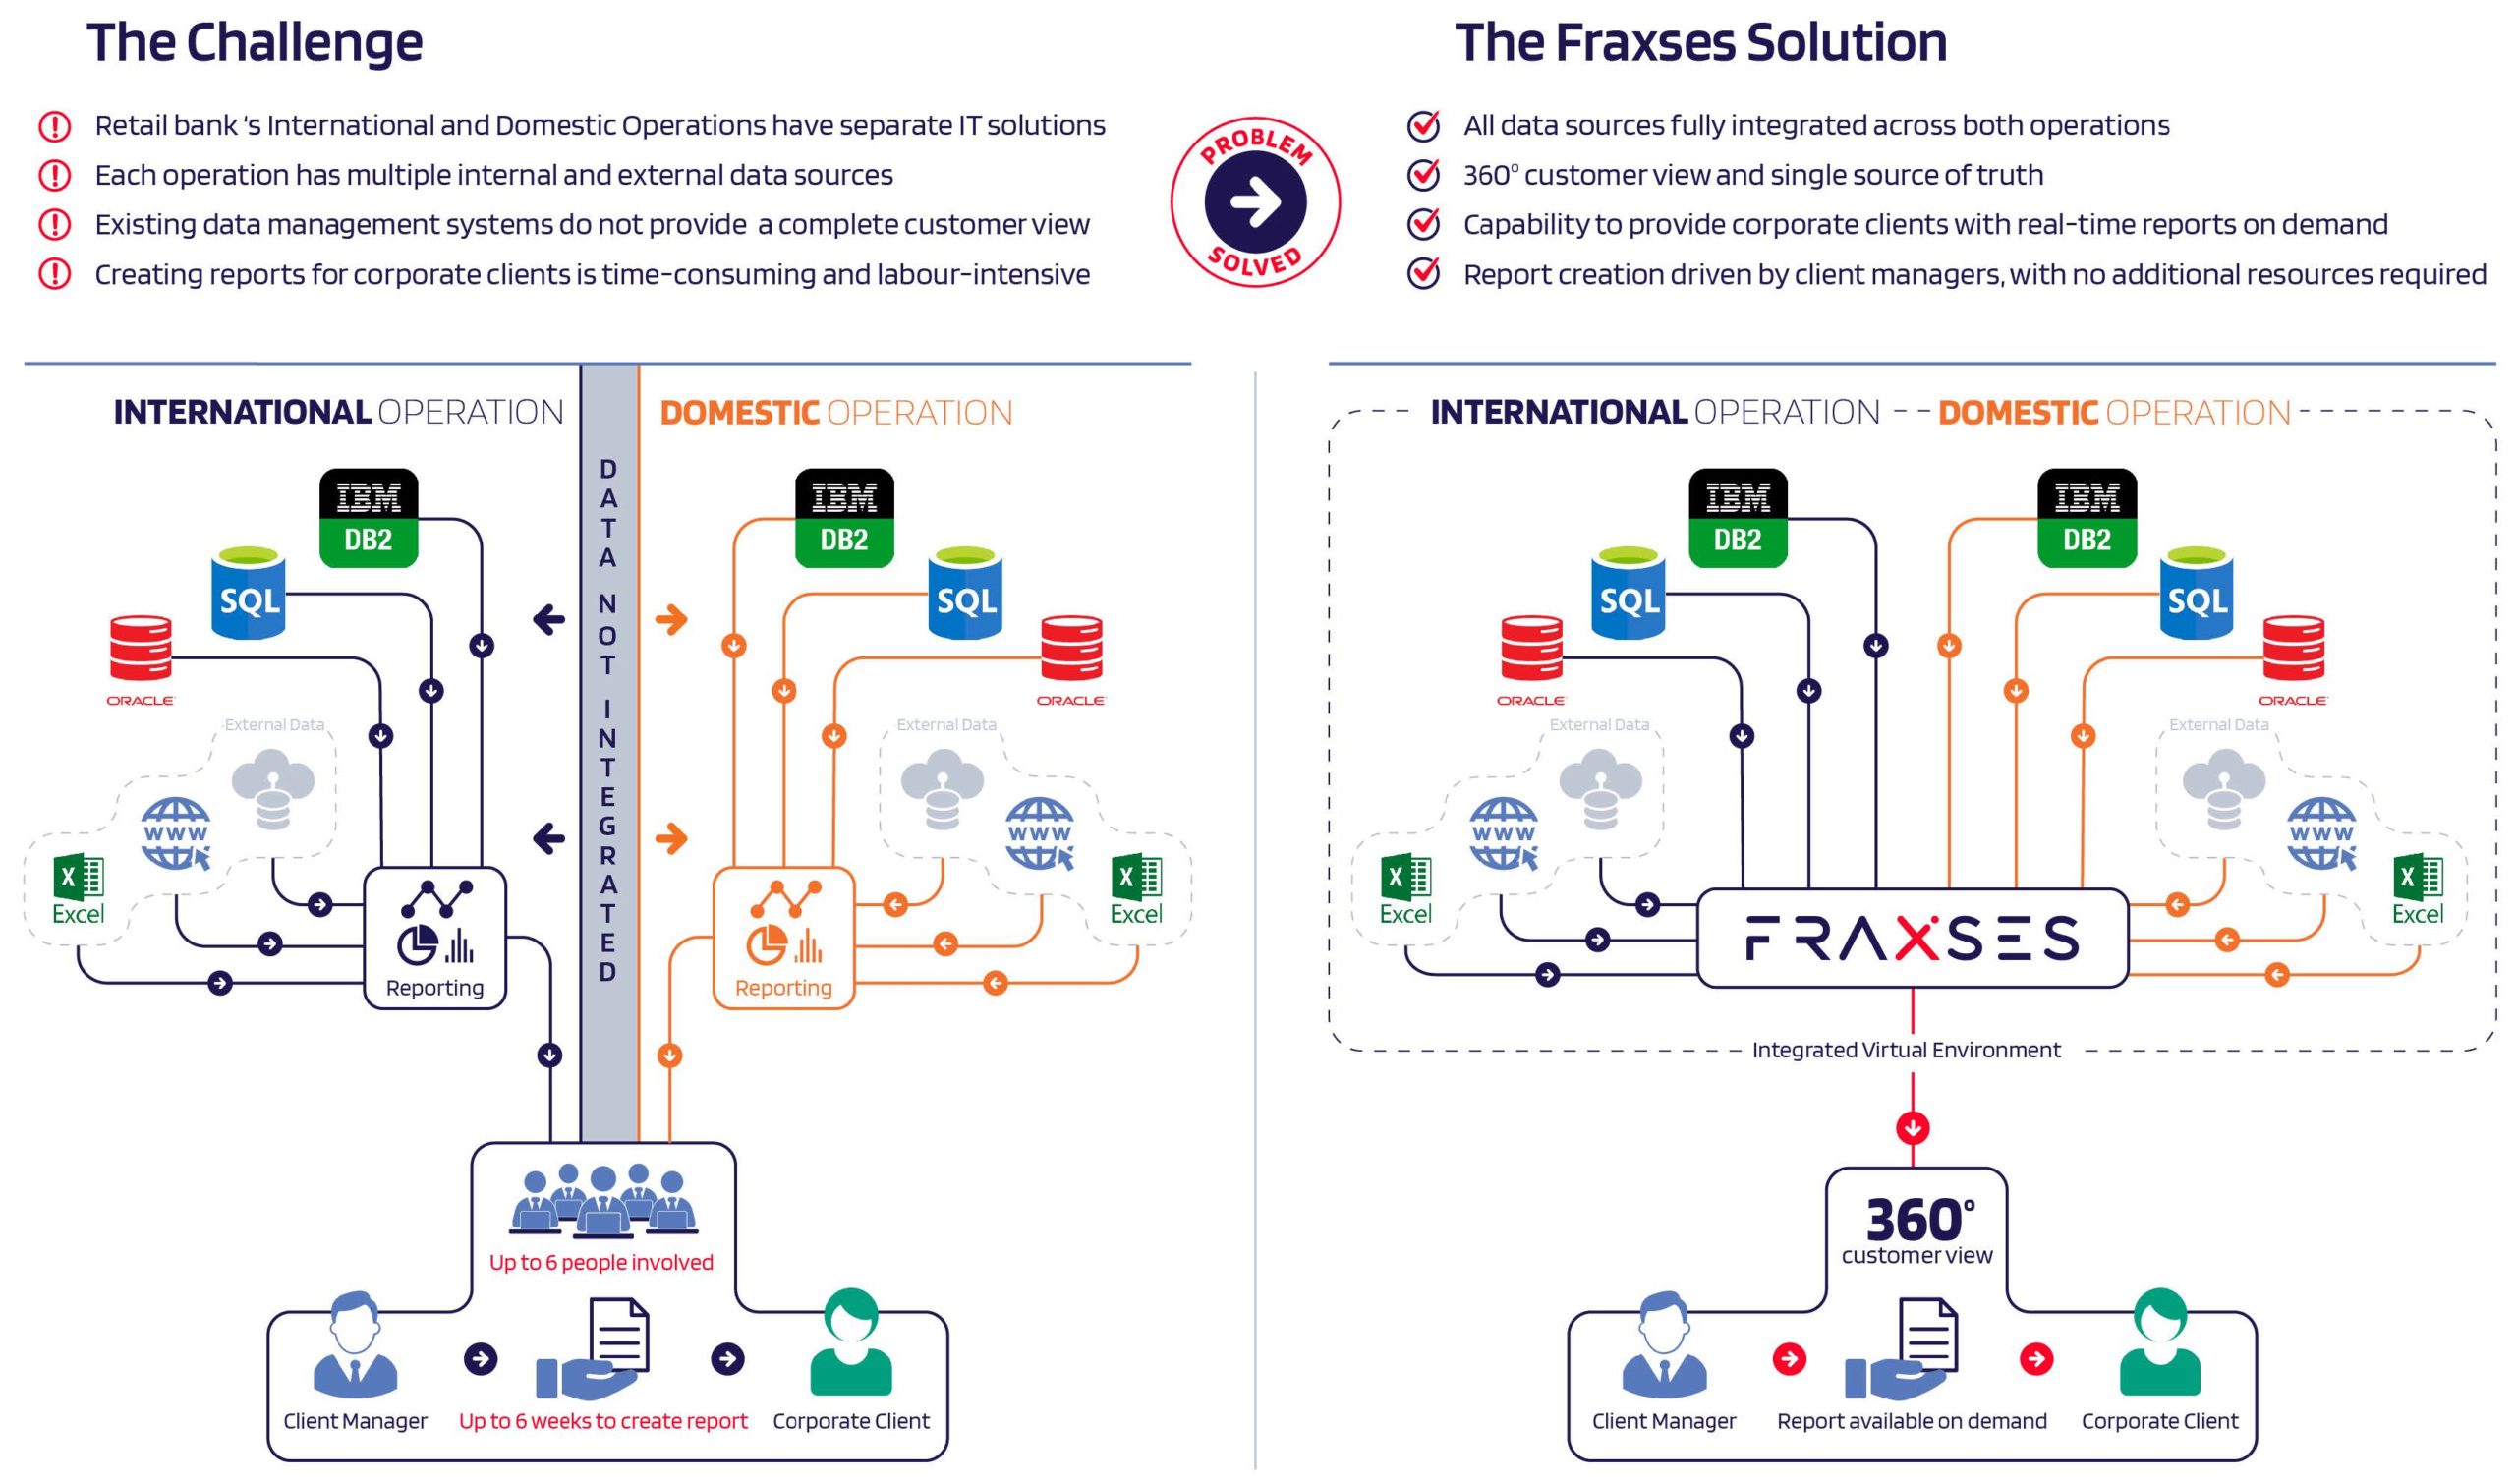 Fraxses-Point-Solution-for-360-Customer-View